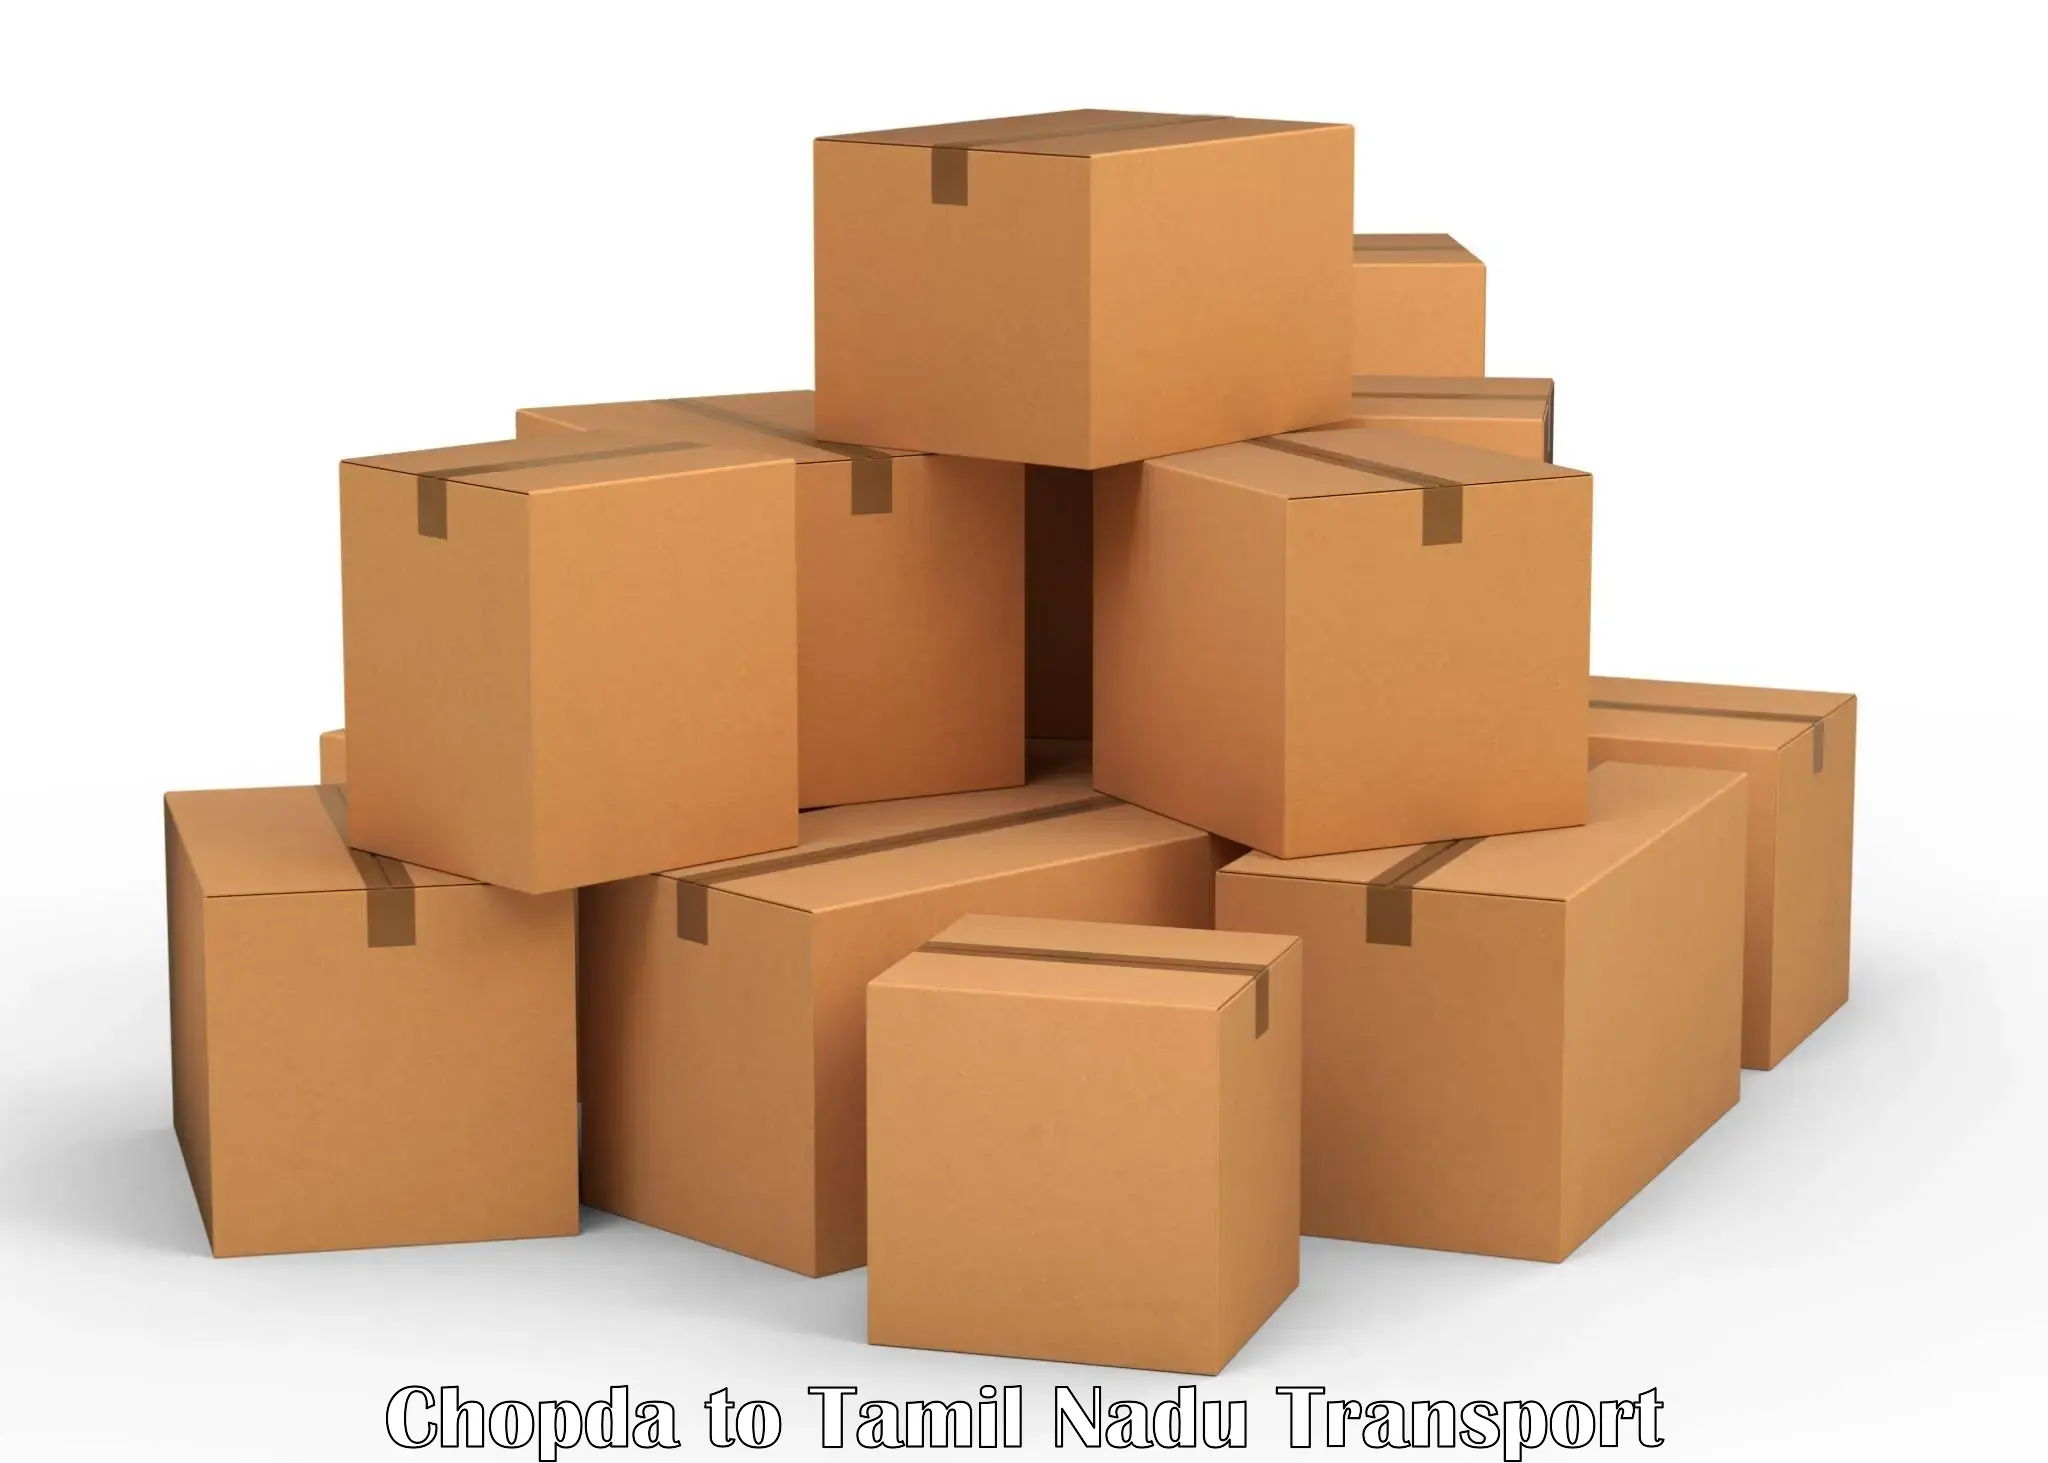 Air freight transport services Chopda to Tamil Nadu Veterinary and Animal Sciences University Chennai